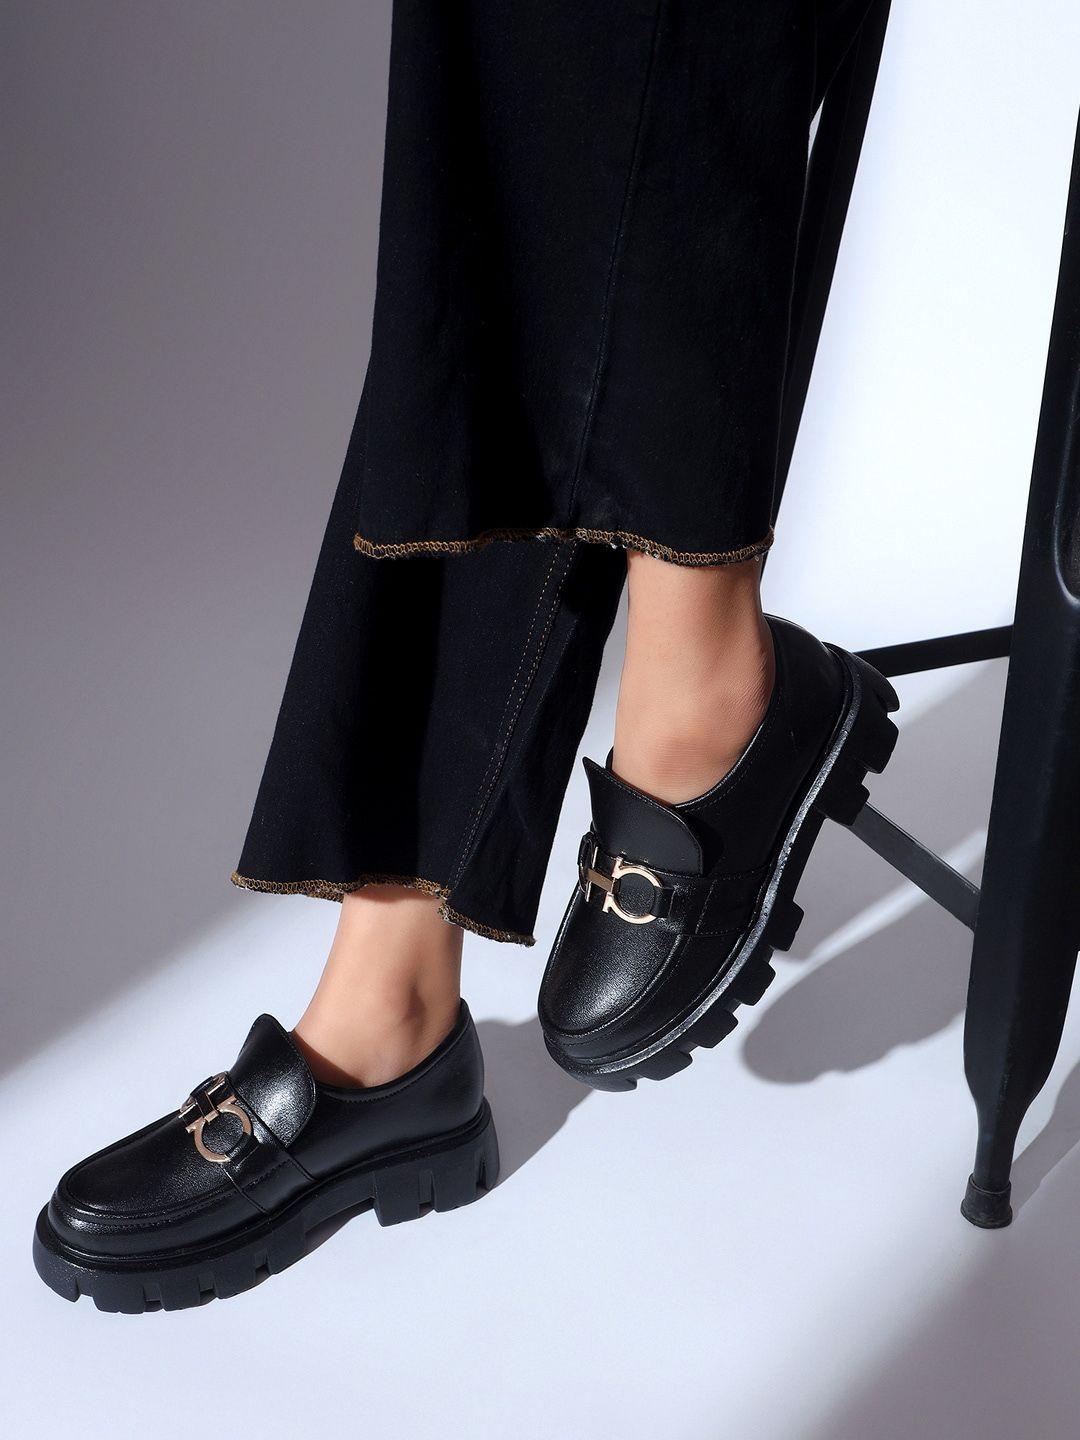 the roadster lifestyle co. women black buckled heeled horsebit loafers